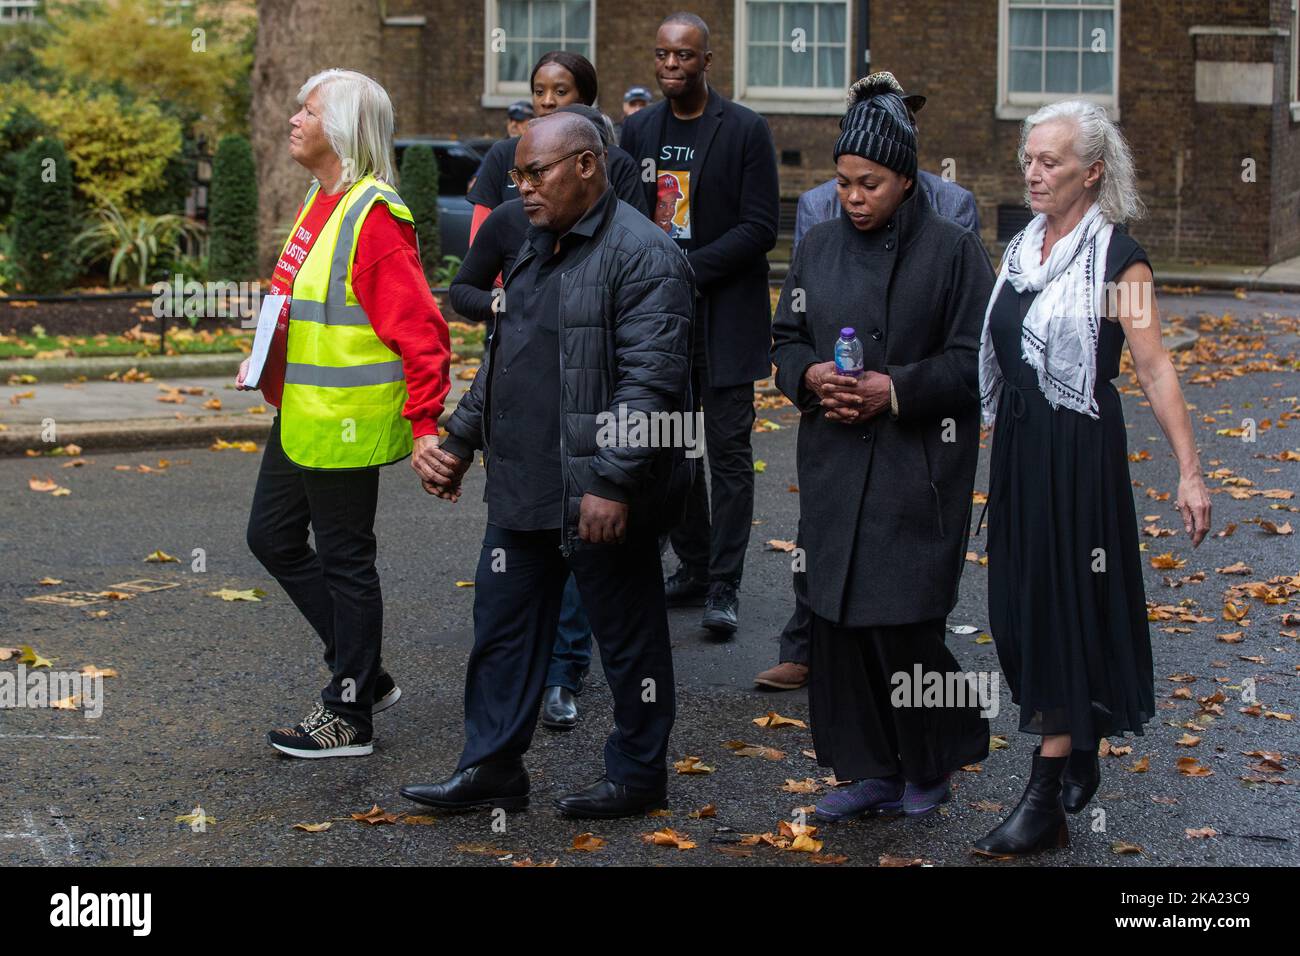 London, UK. 29th October, 2022. Representatives of the United Families & Friends Campaign (UFFC) arrive in Downing Street to present letters to the Prime Minister following their annual procession in remembrance of family members and friends who died in police custody, in prison, in immigration detention or in secure psychiatric hospitals. UFFC was established in 1997 as a support network of black families but now includes the families and friends of people from varied ethnic and cultural backgrounds. There have been 1,838 deaths in police custody or otherwise following contact with the police Stock Photo